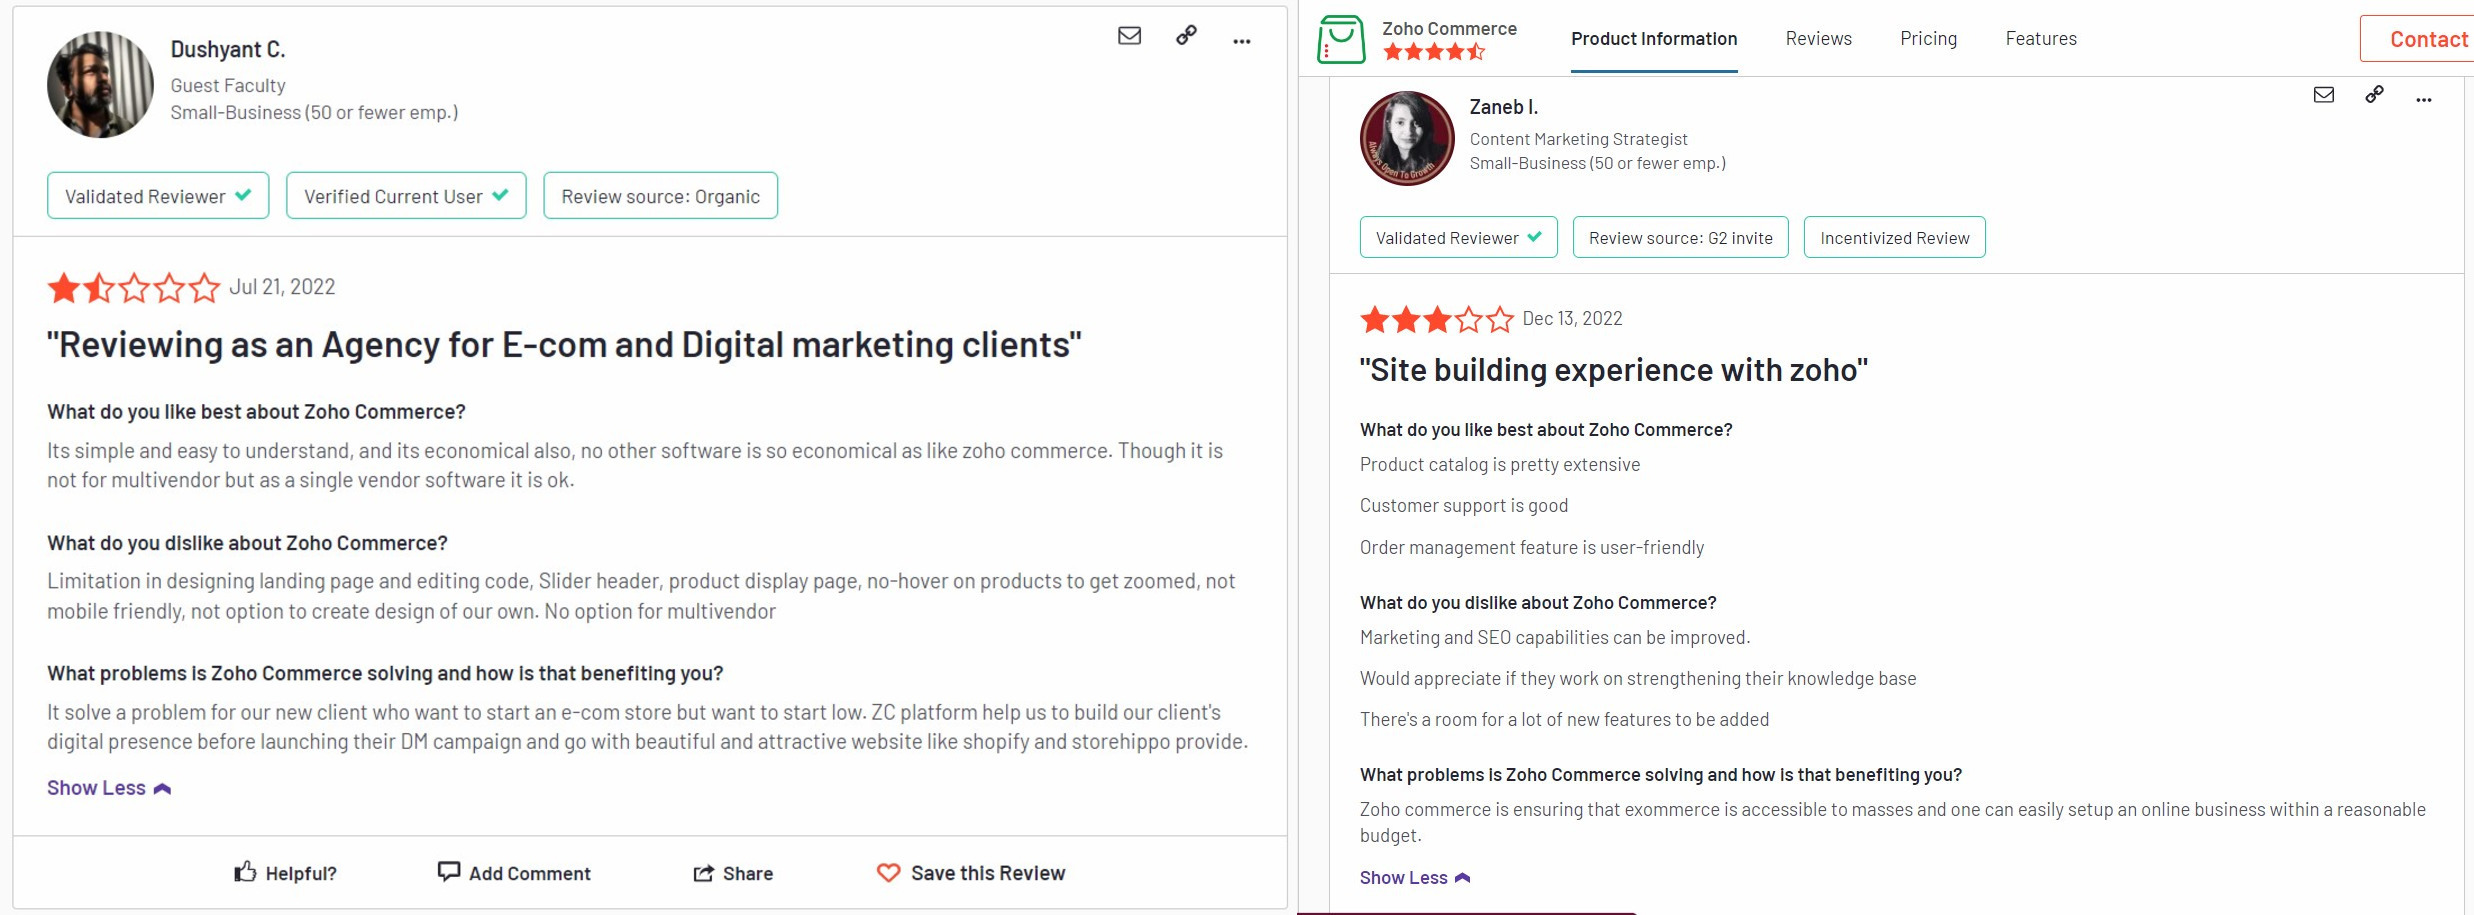 Customer reviews on Zoho commerce